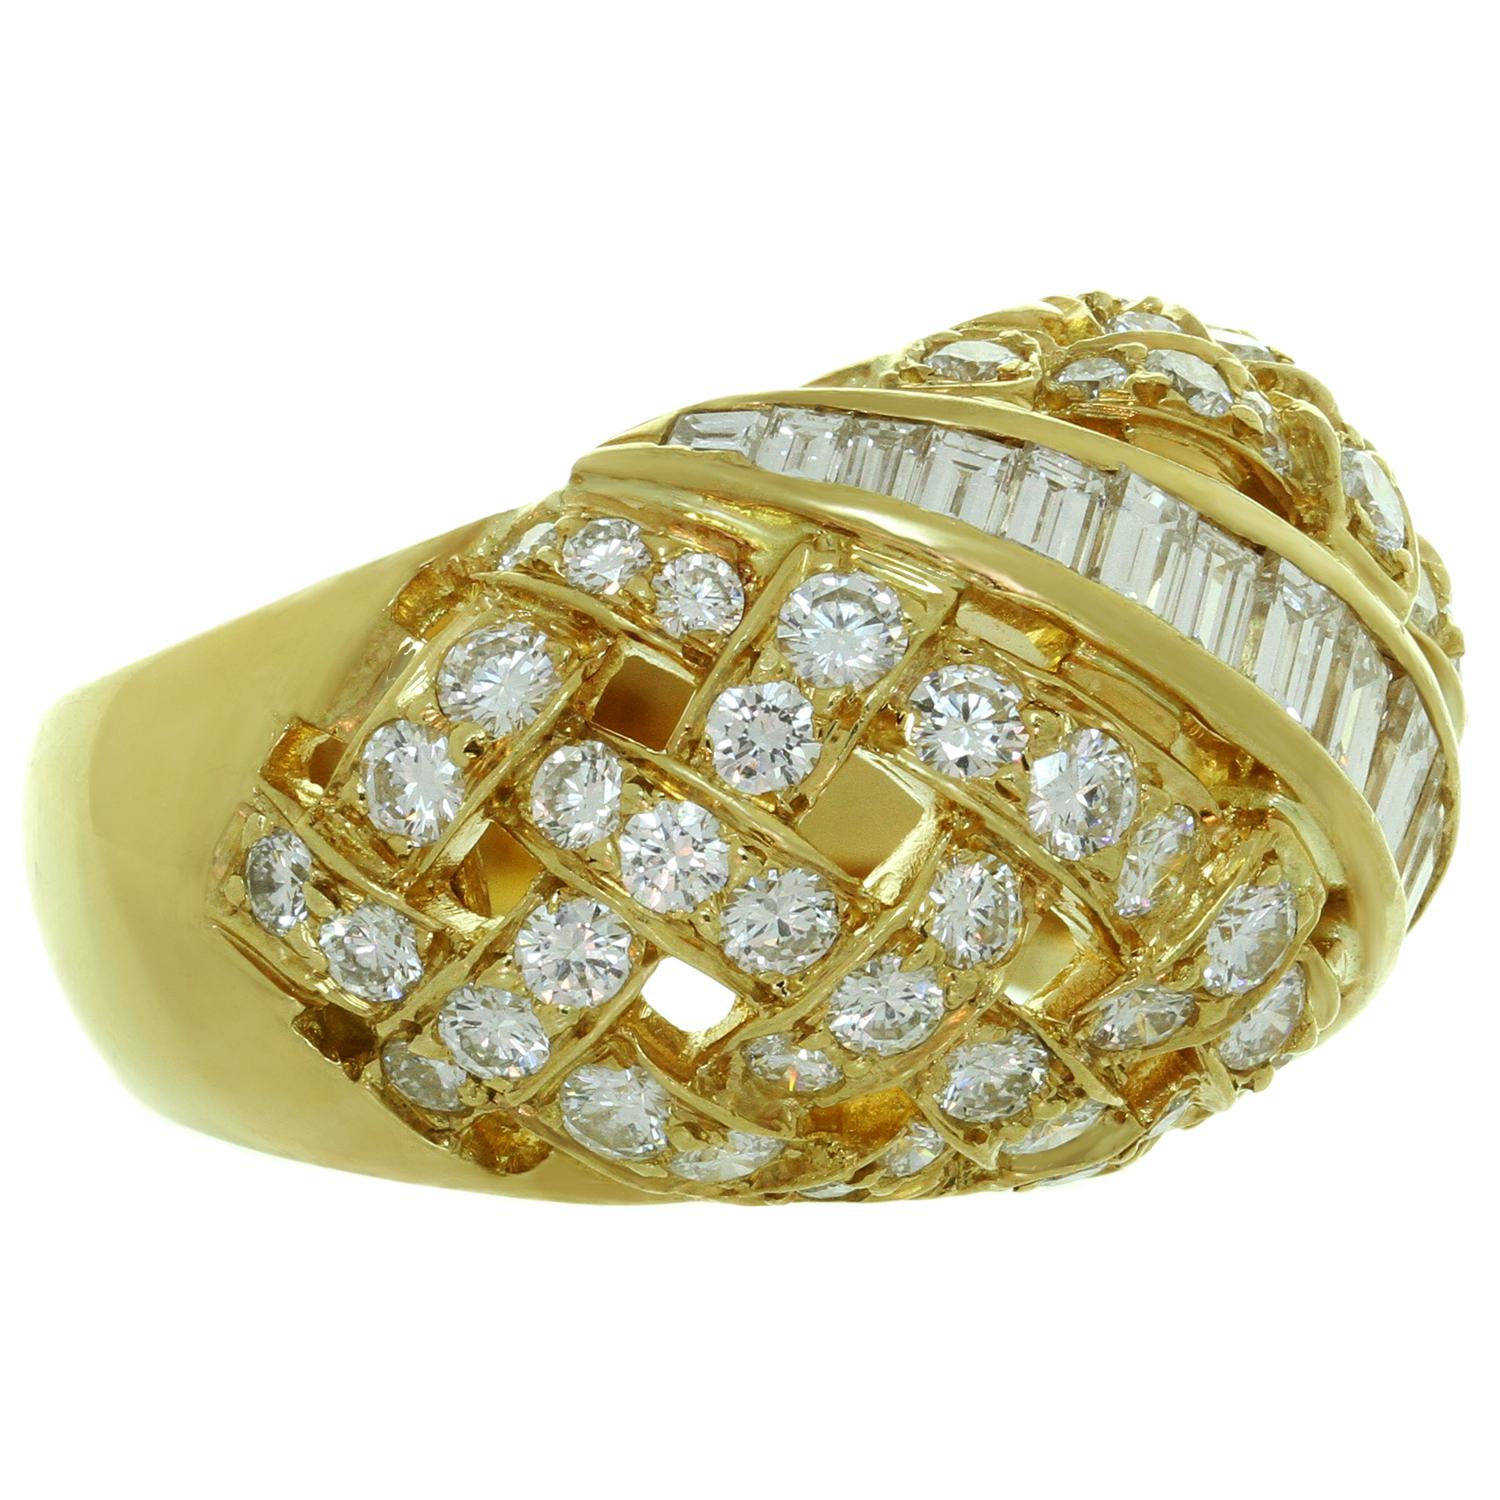 Tiffany & Co. Vannerie Diamond Yellow Gold Ring In Excellent Condition For Sale In New York, NY